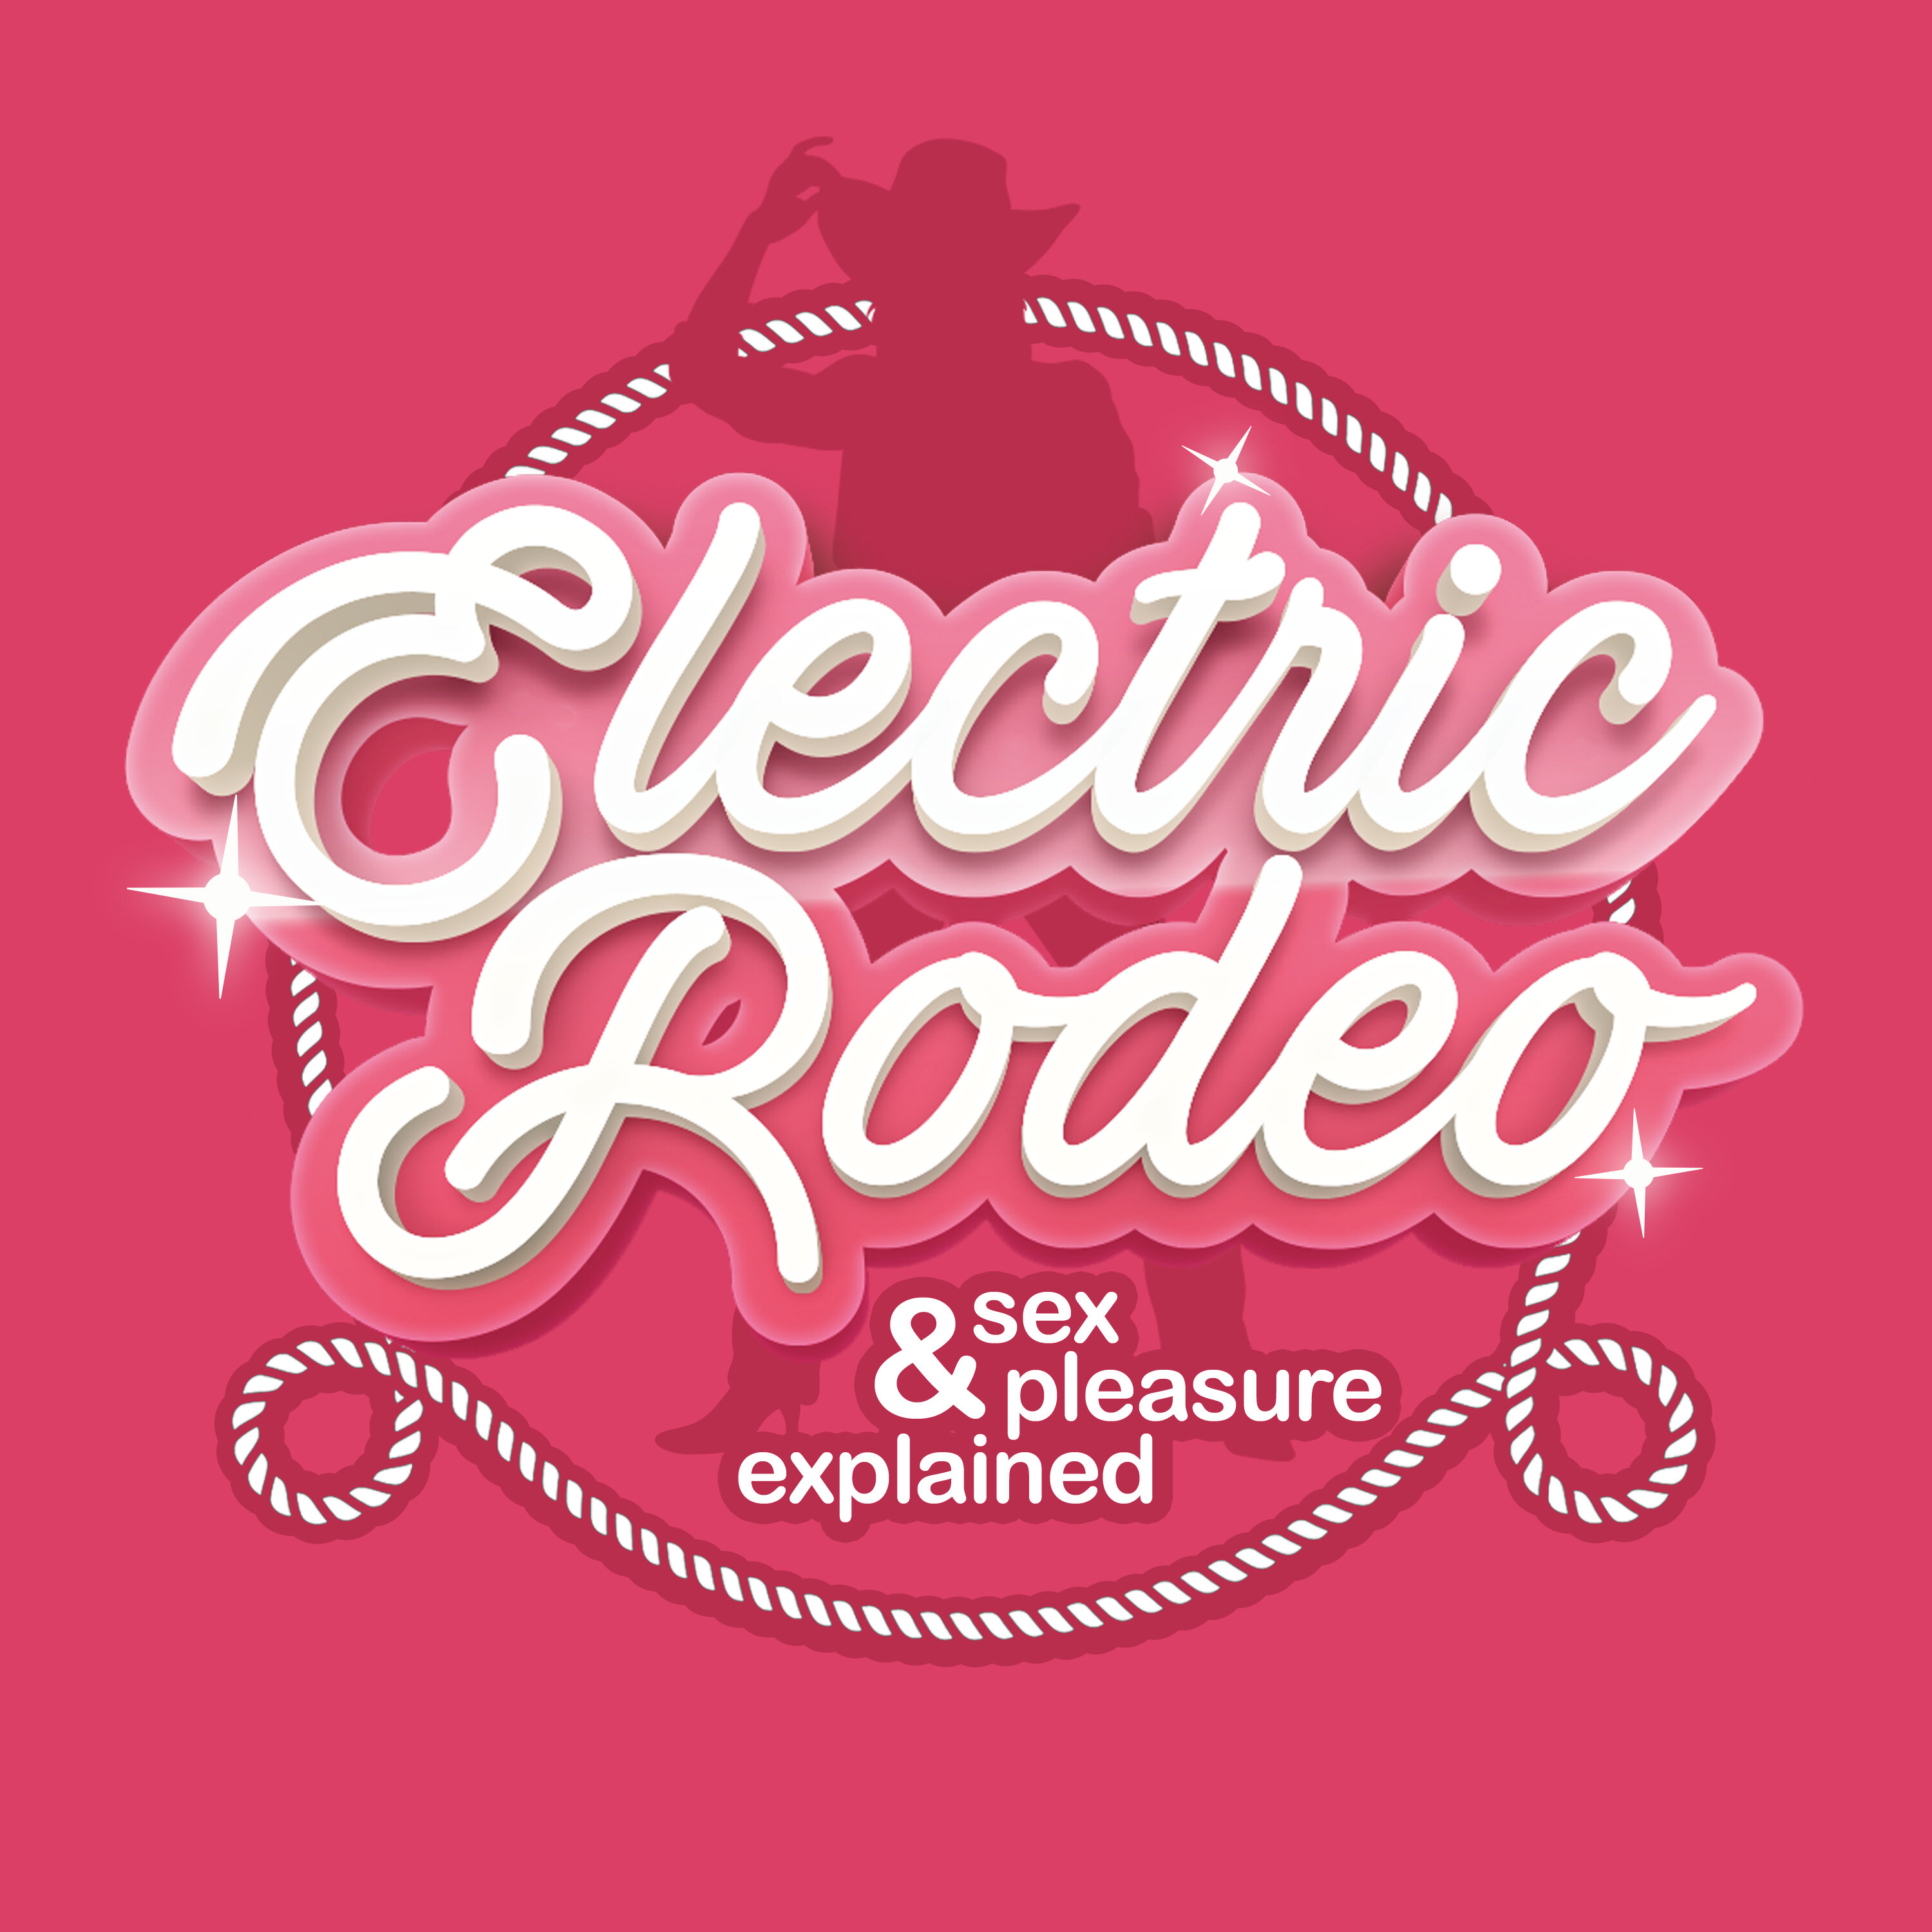 The Electric Rodeo